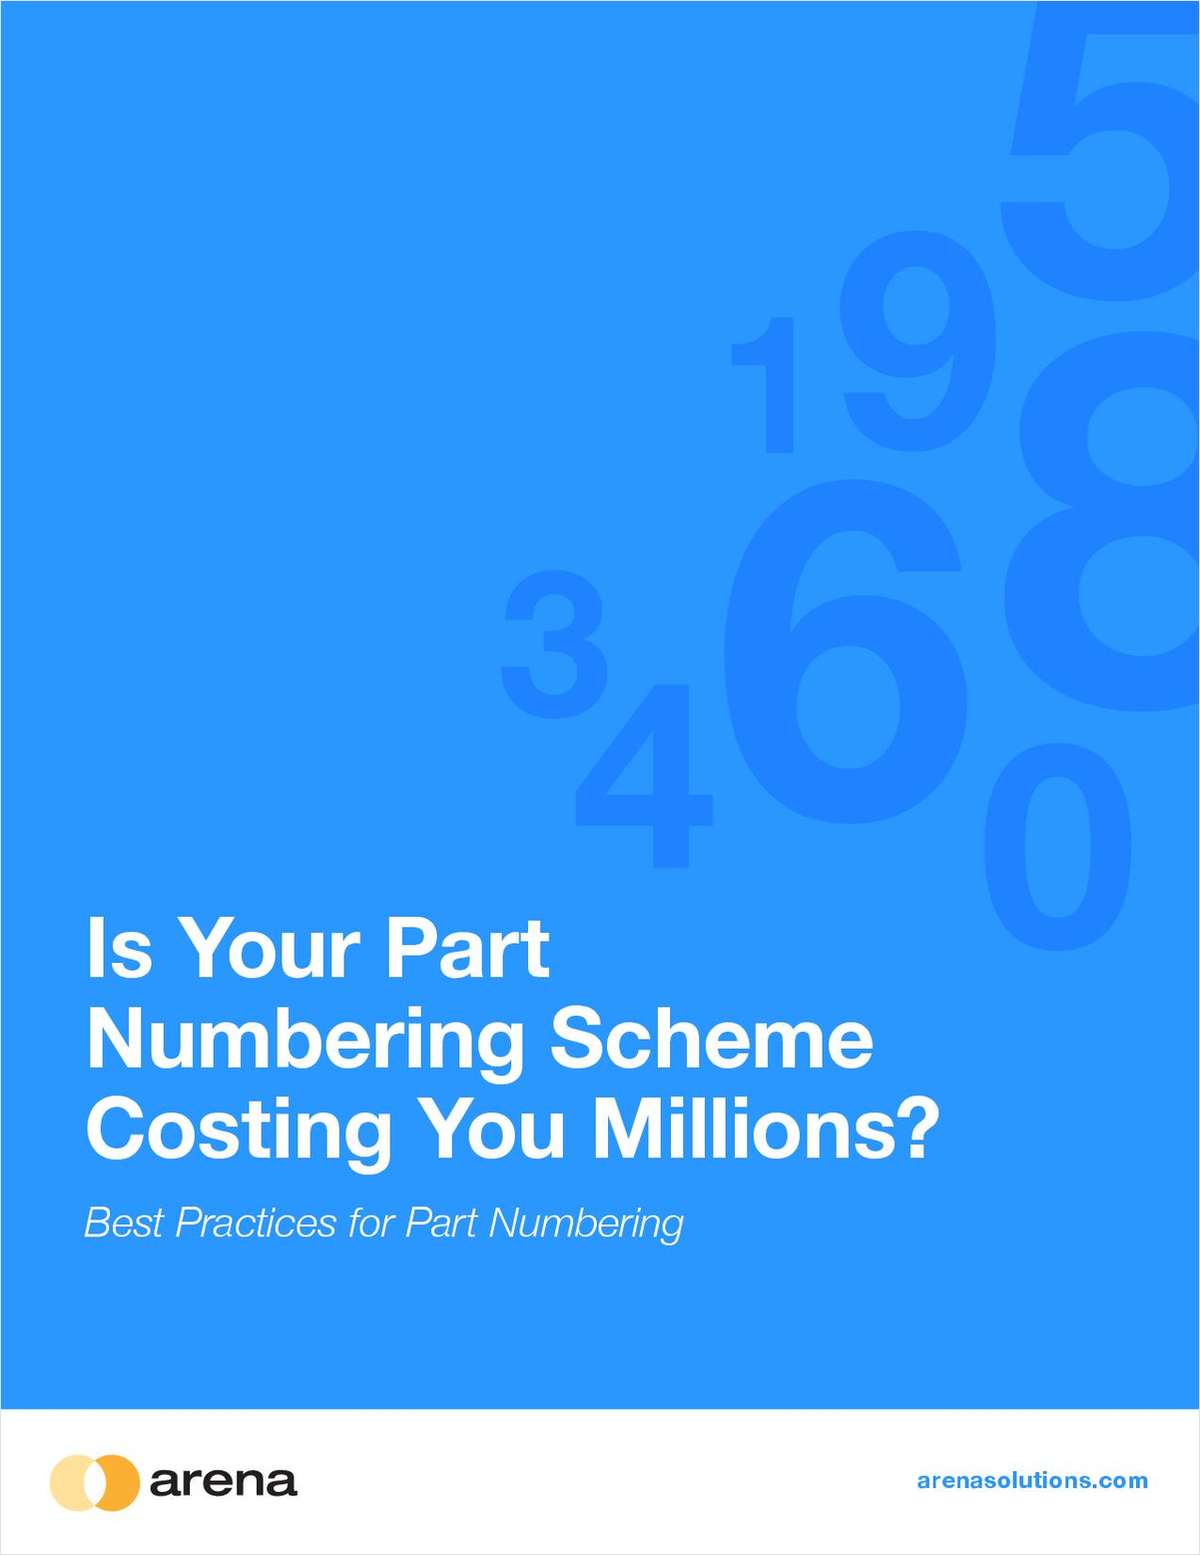 Is Your Part Numbering Scheme Costing You Millions?